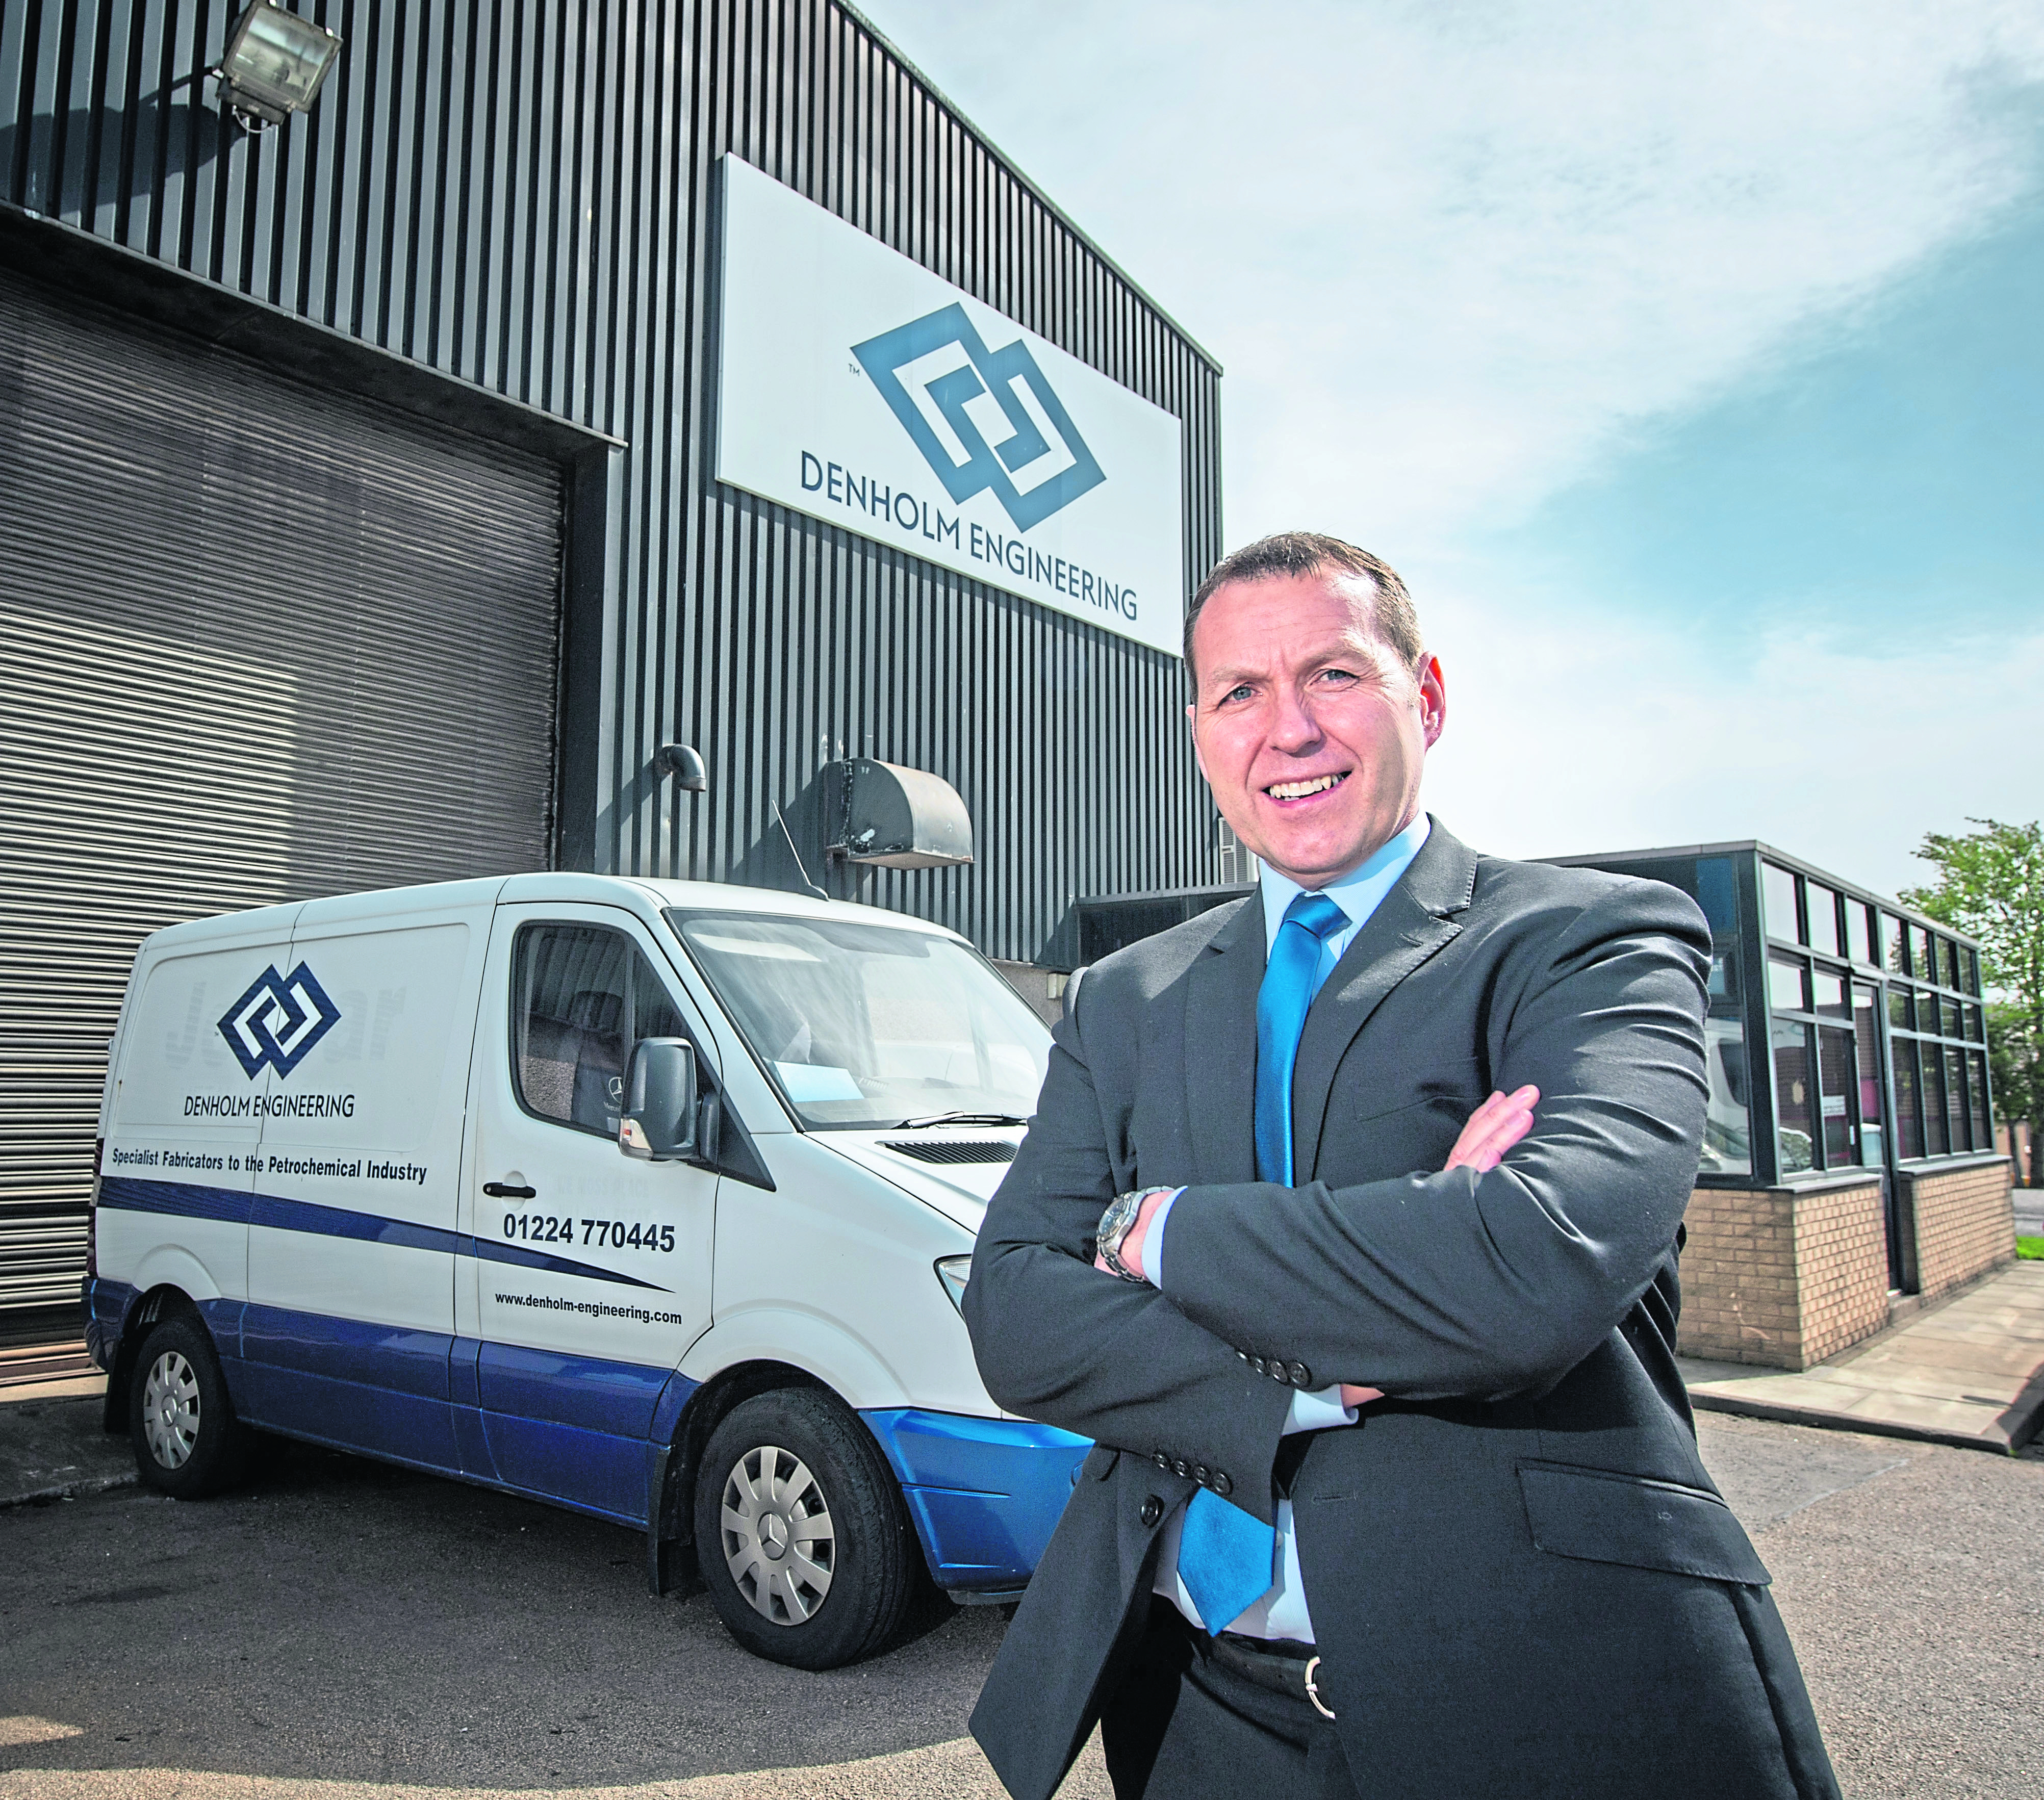 DIVIDENDS: Denholm Engineering has seen its order intake double and its workforce increase to cope with growing demand, says director Bruce Gill